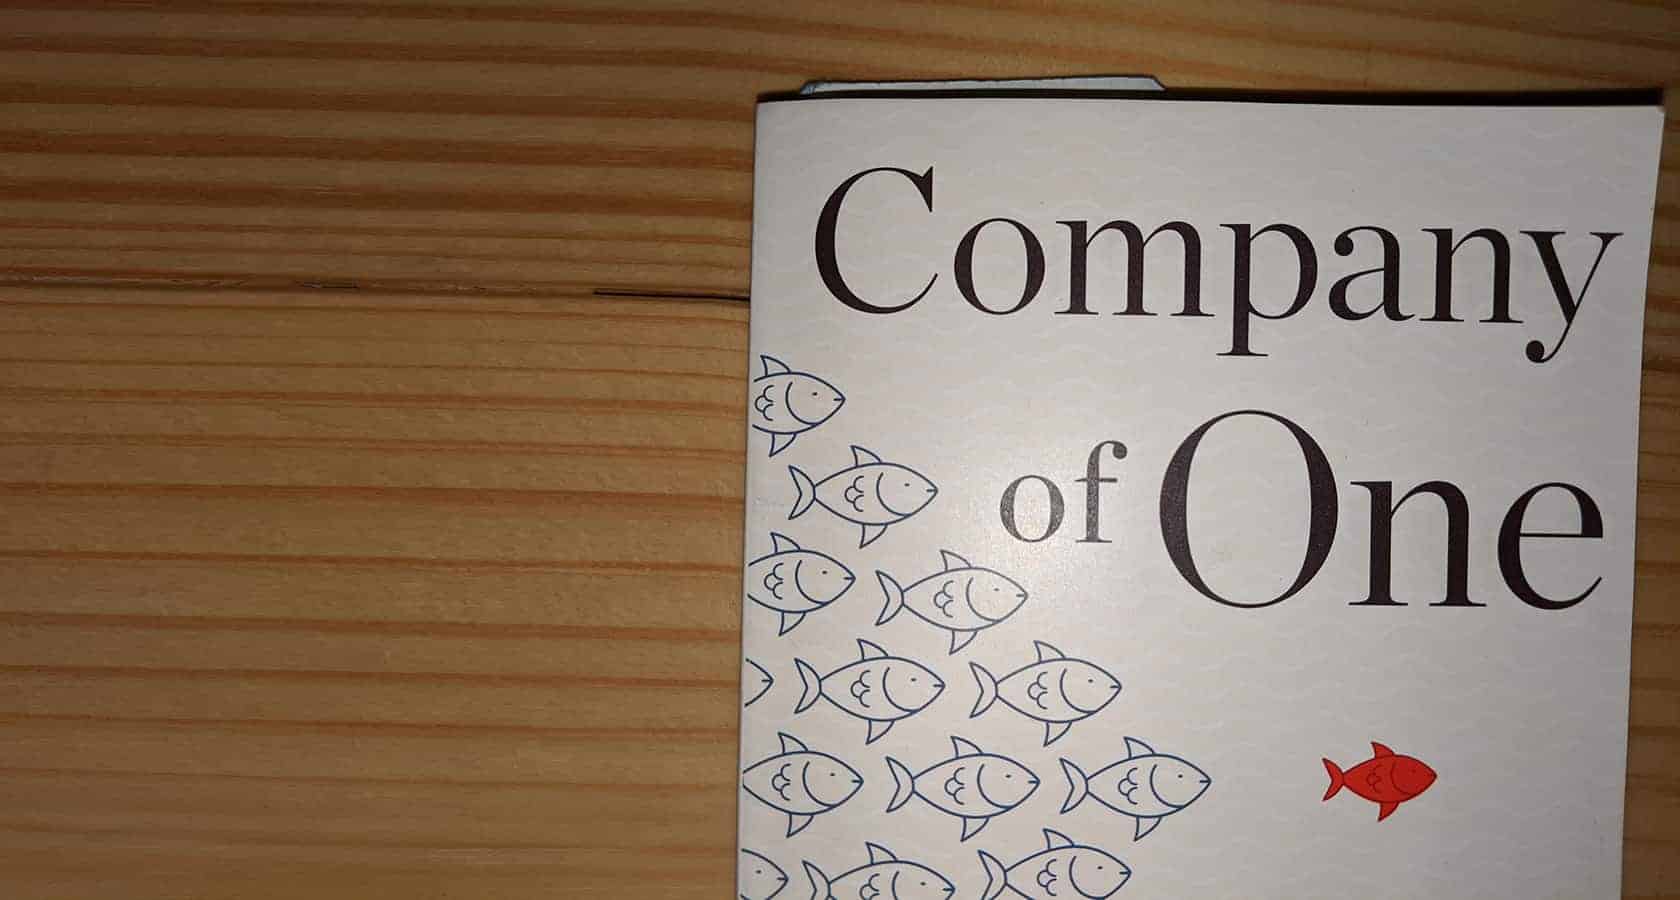 Company of One Book Cover